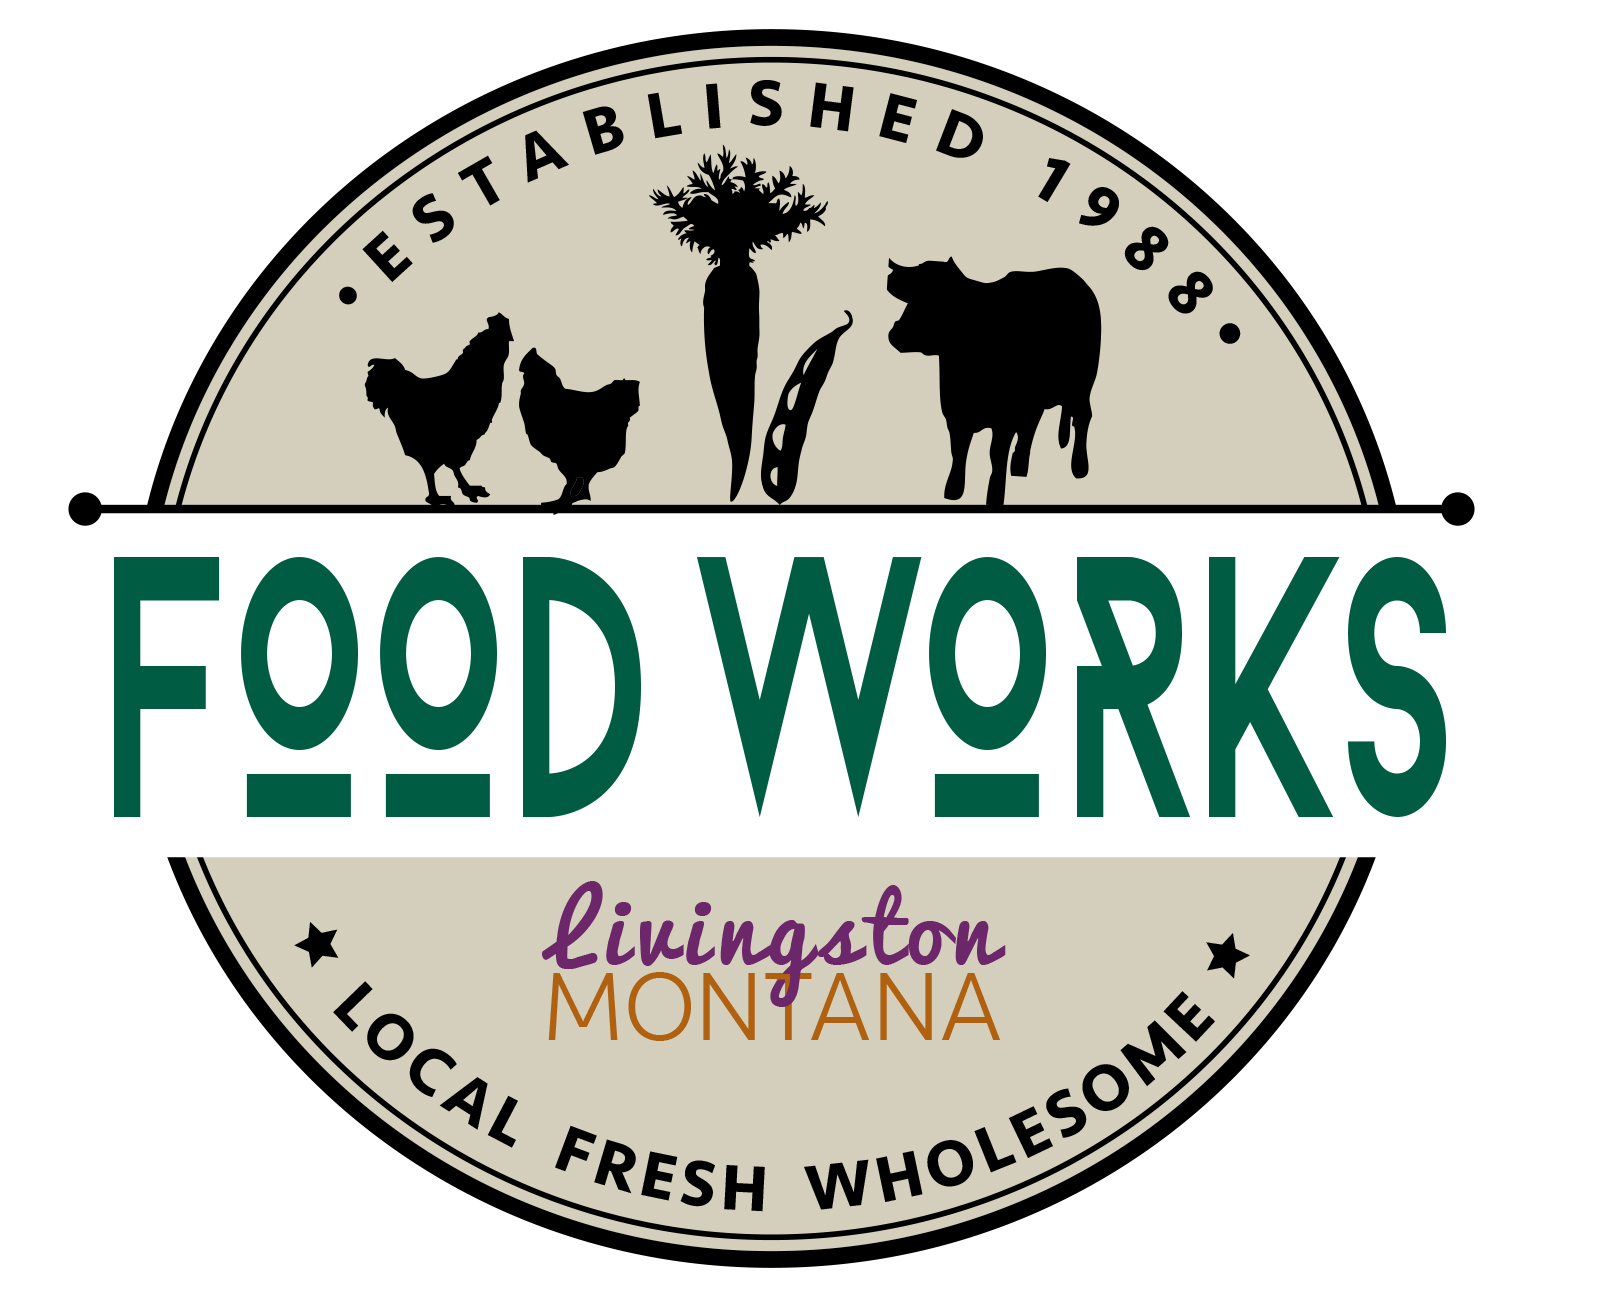 Tan and green brown foodworks logo